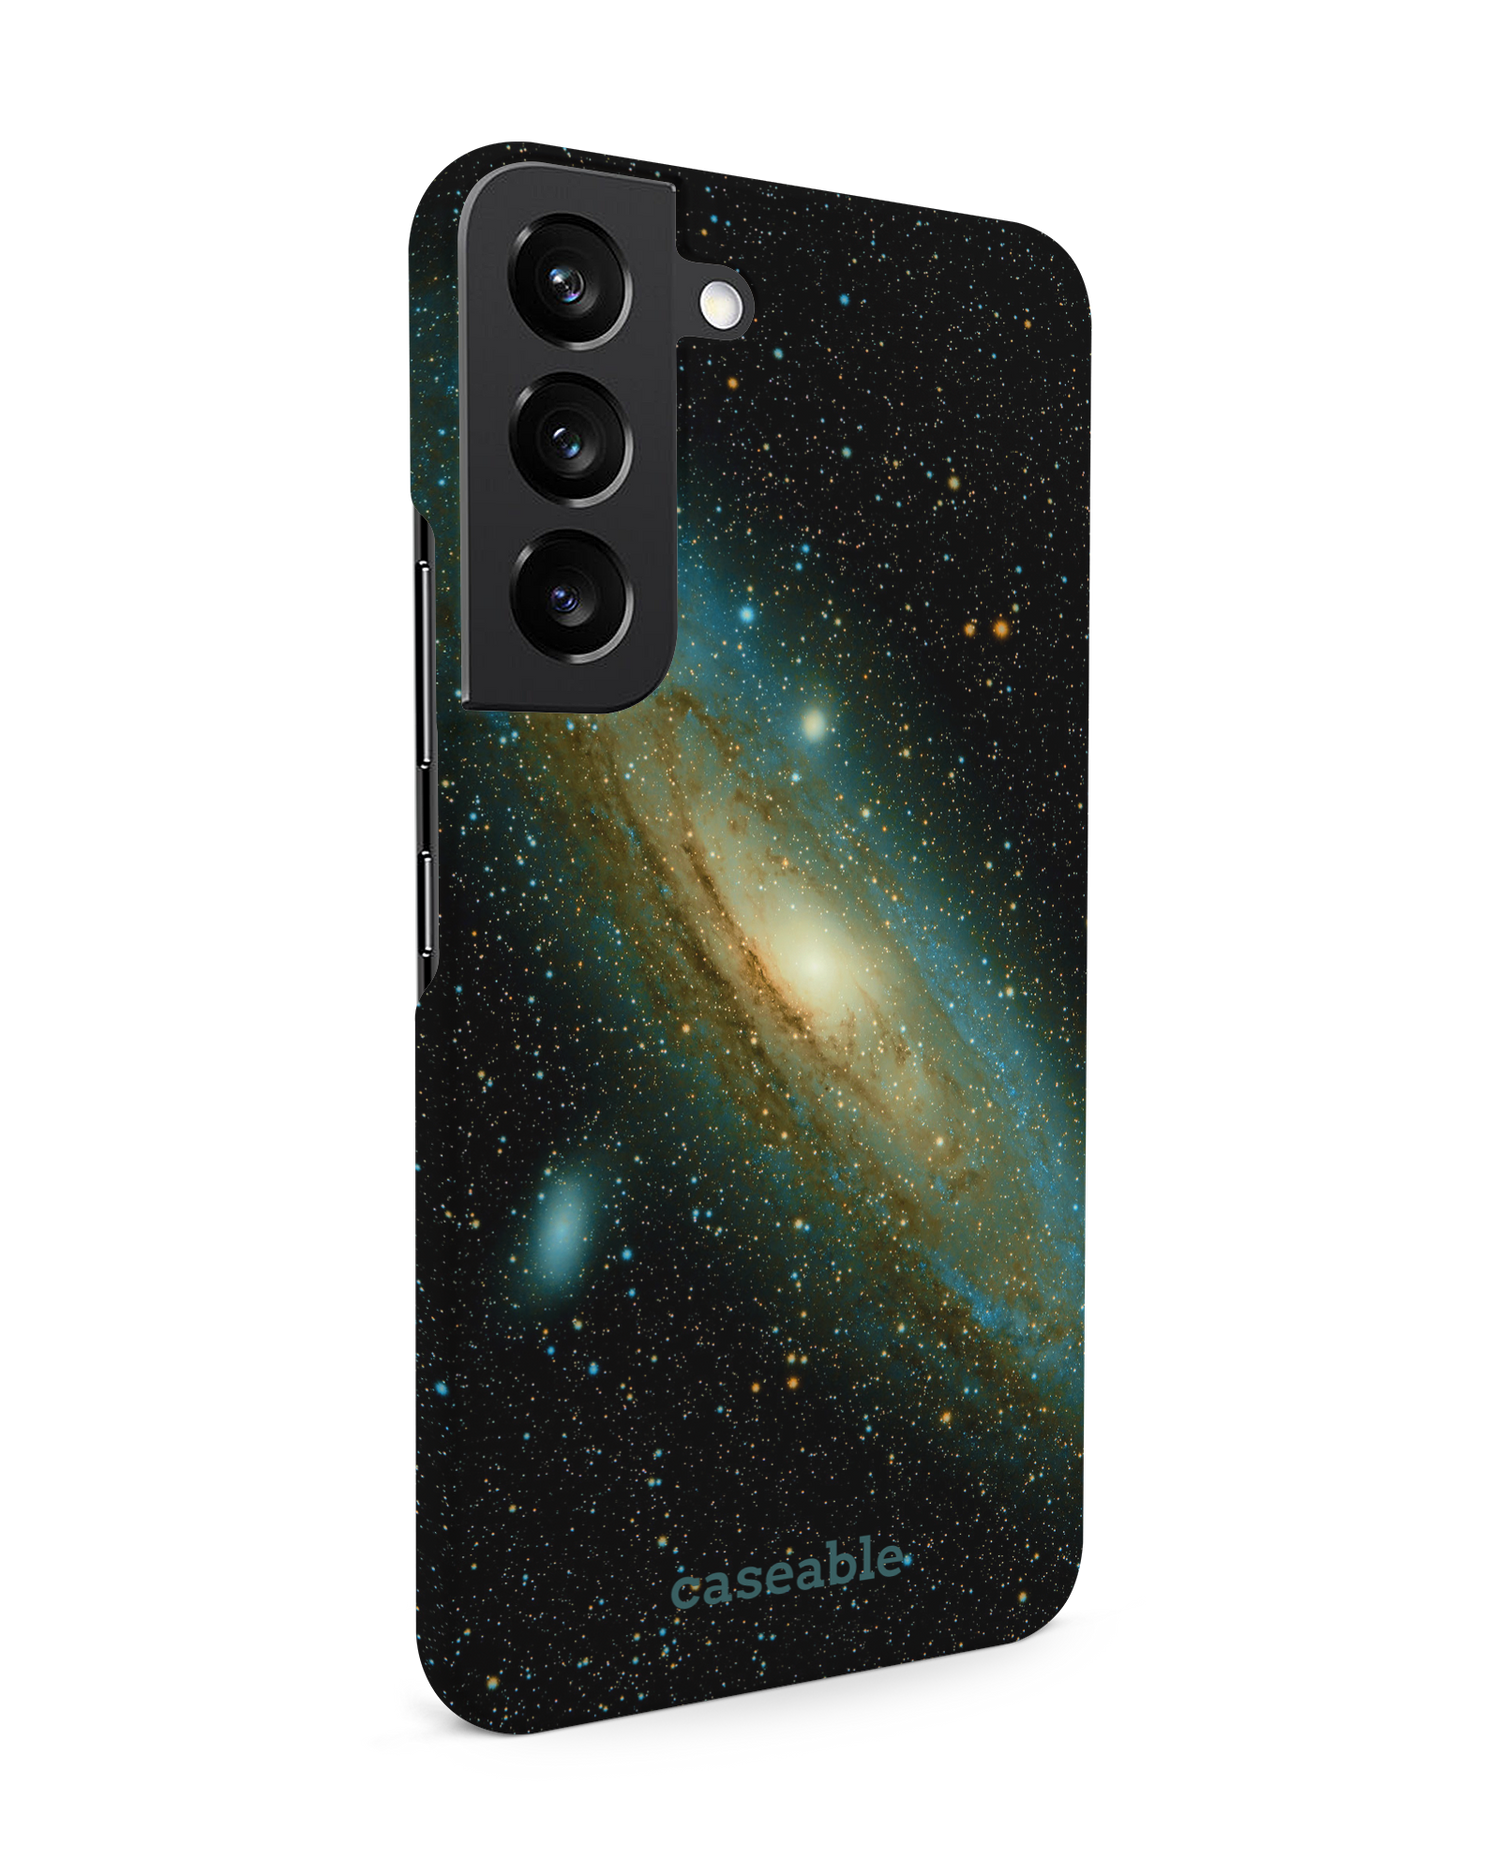 Outer Space Hard Shell Phone Case Samsung Galaxy S22 5G: View from the left side